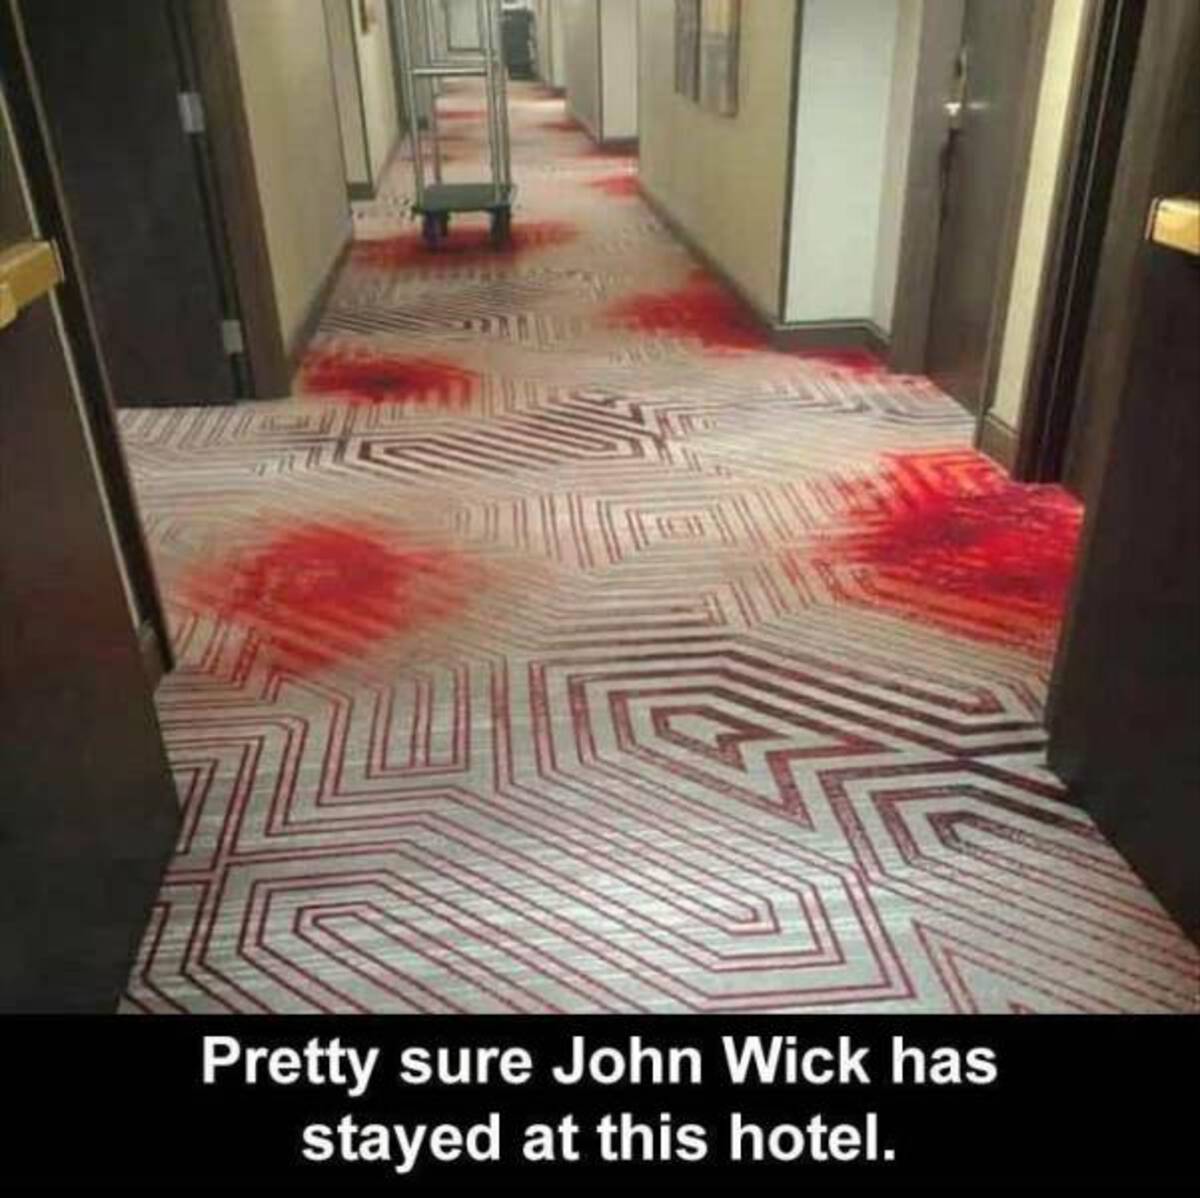 Internet meme - Pretty sure John Wick has stayed at this hotel.